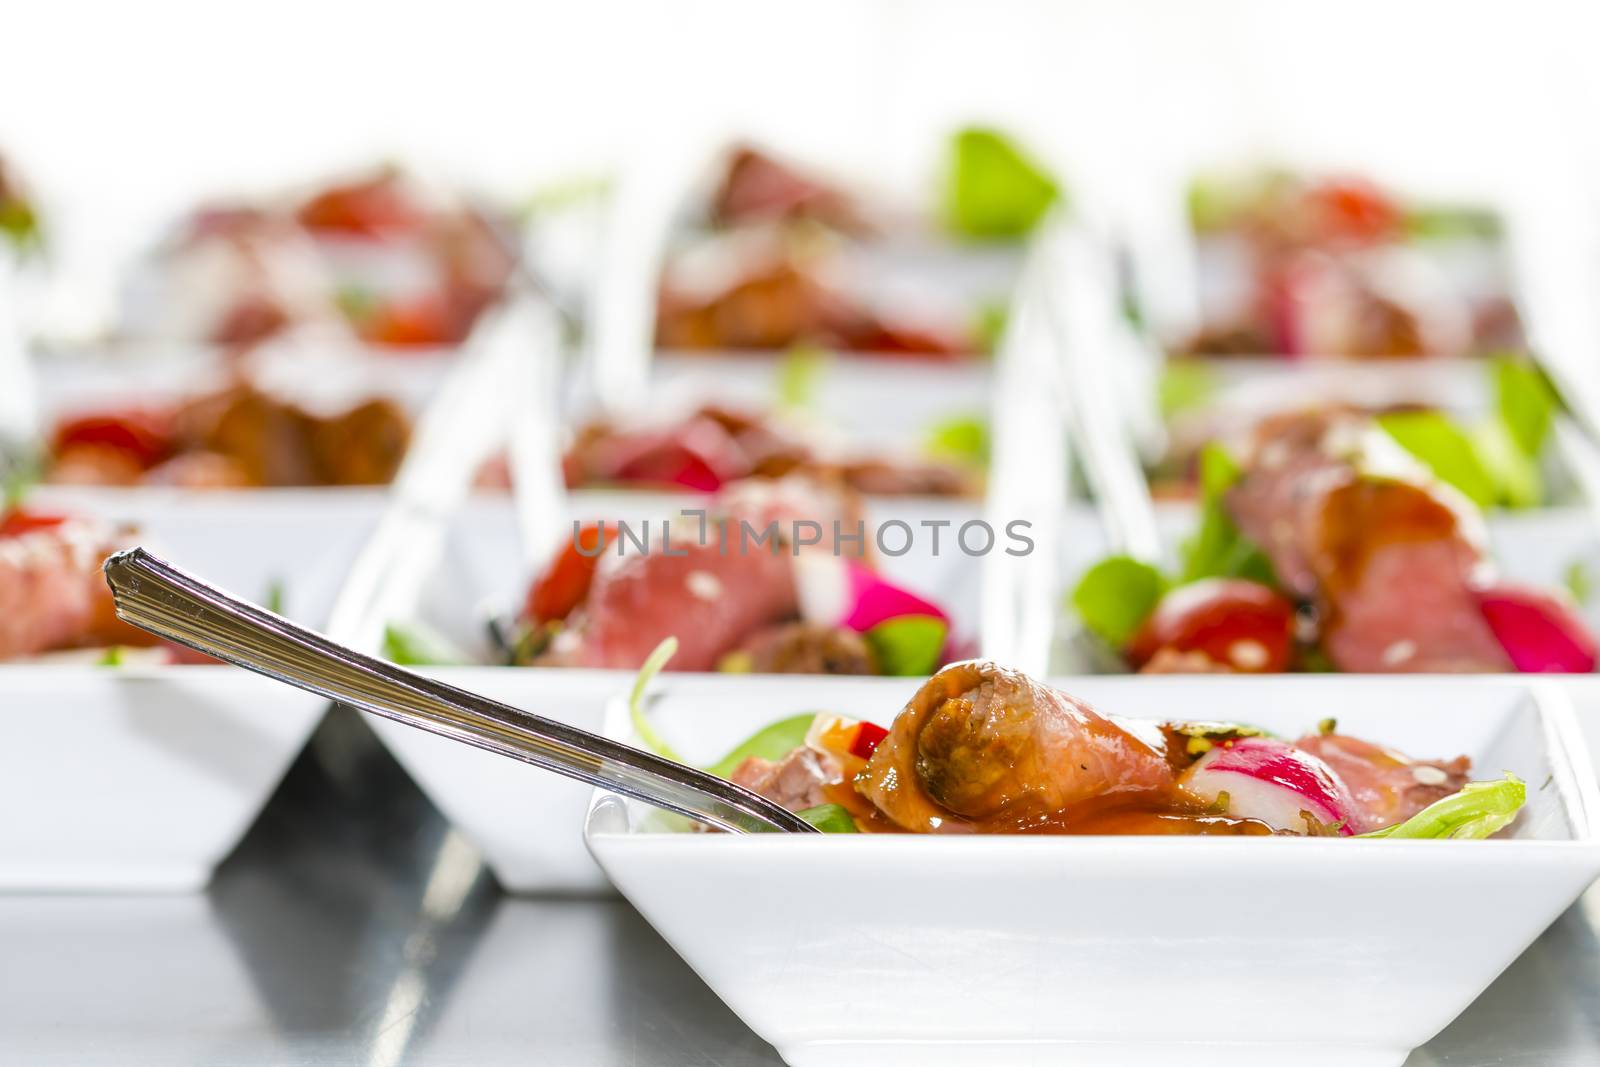 Colorful snacks (appetizers) in white cups with forks on table. Healthy diet or lifestyle concept. Low angle and selective focus. Colorful.